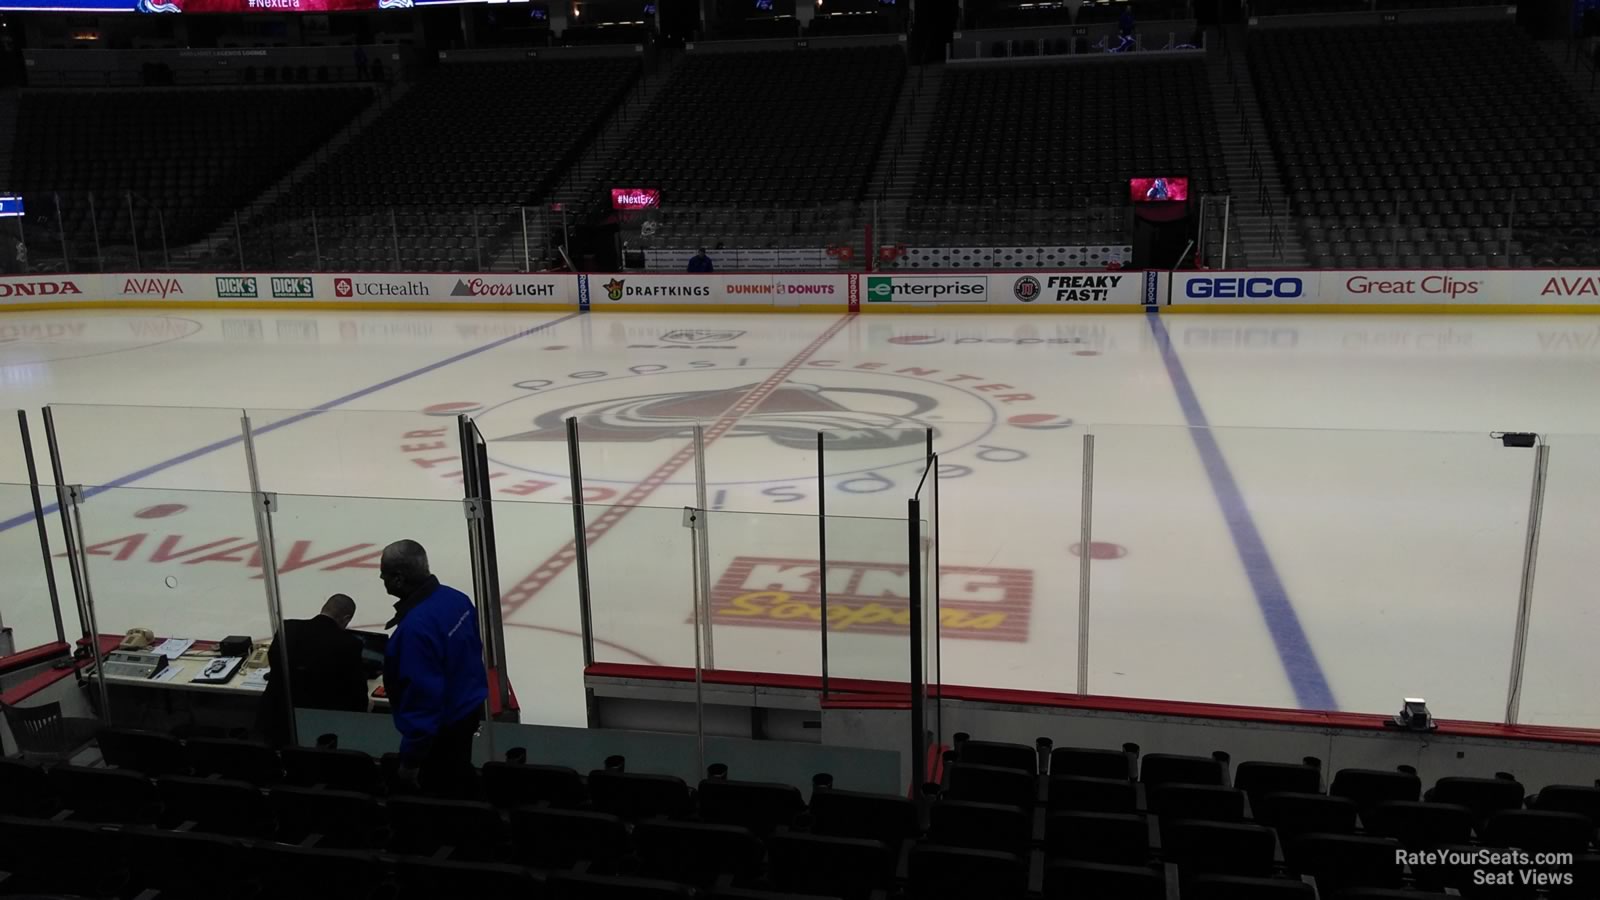 section 124, row 10 seat view  for hockey - ball arena